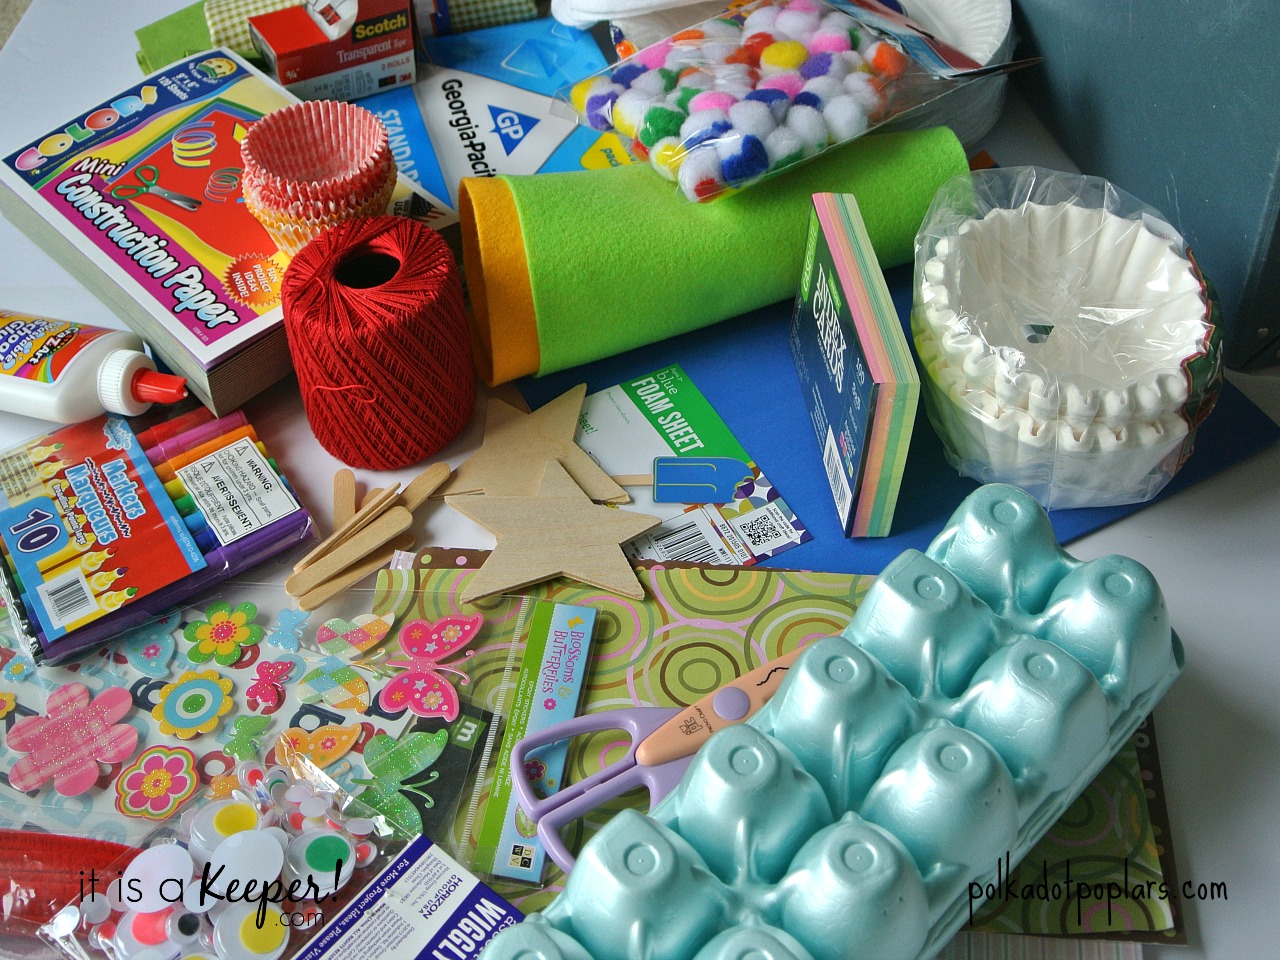 Need a boredom buster? Keep the kids busy this summer with these Children's Craft Box Ideas